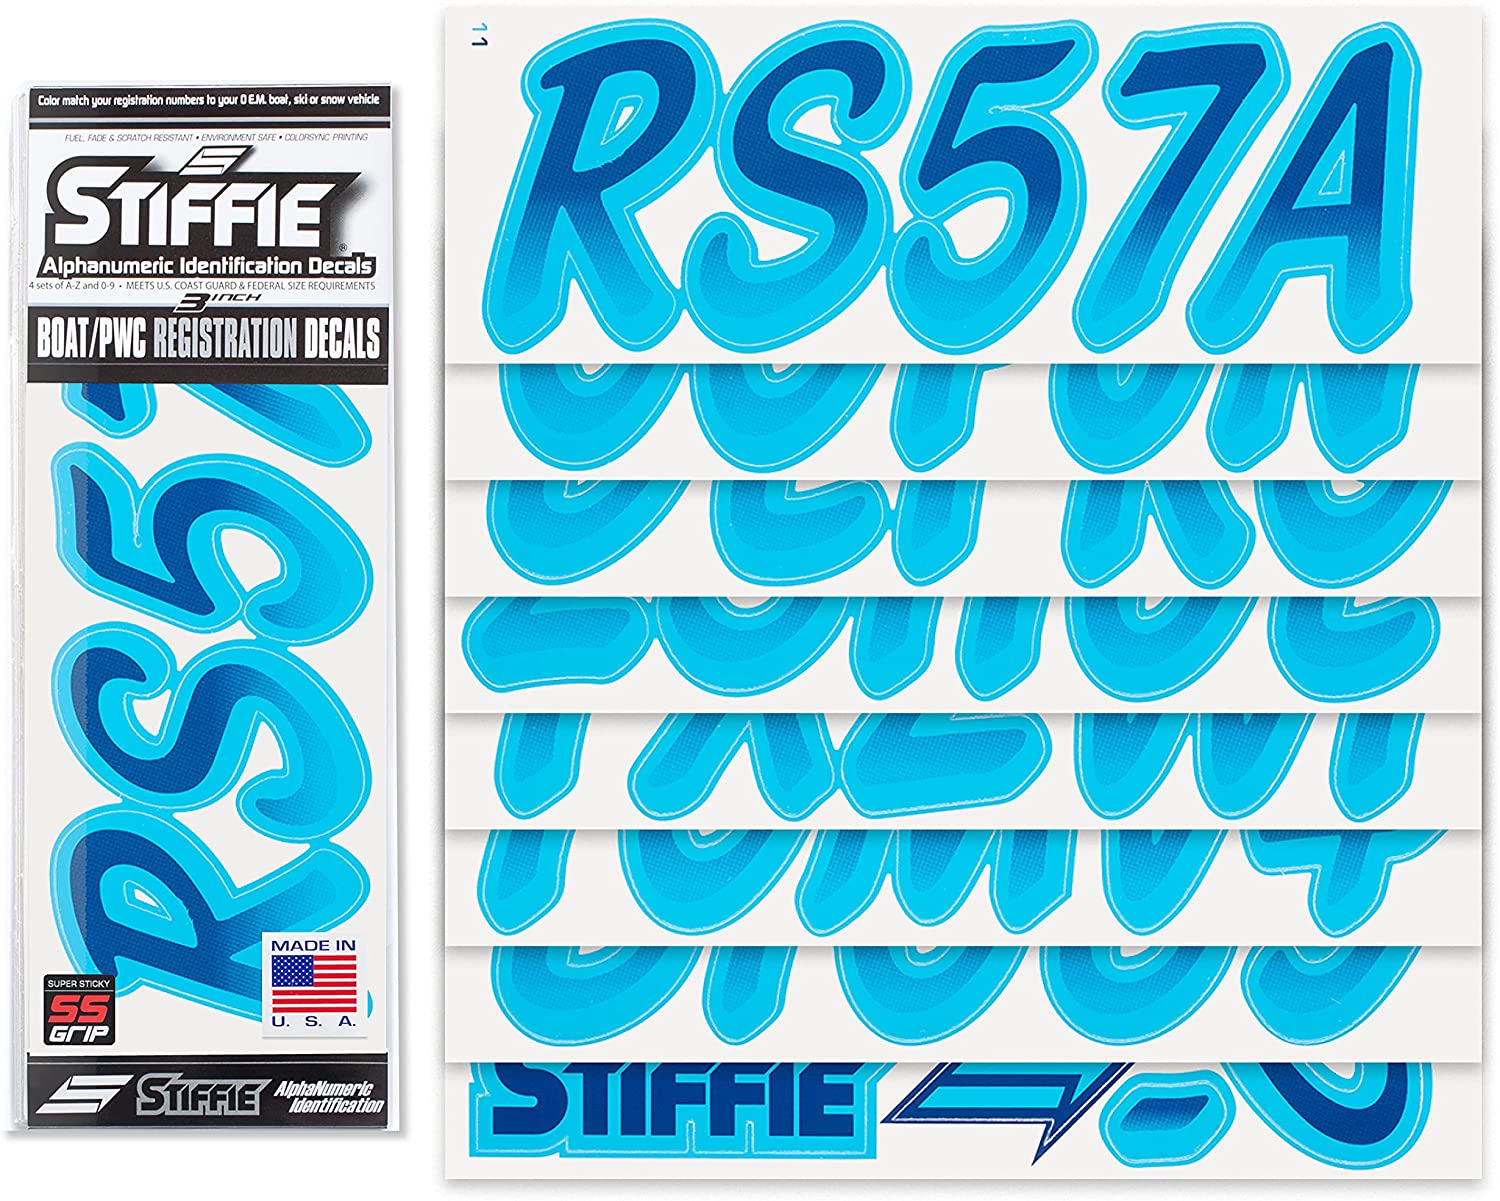 STIFFIE Whipline Navy/Sky Blue 3" Alpha-Numeric Registration Identification Numbers Stickers Decals for Boats & Personal Watercraft